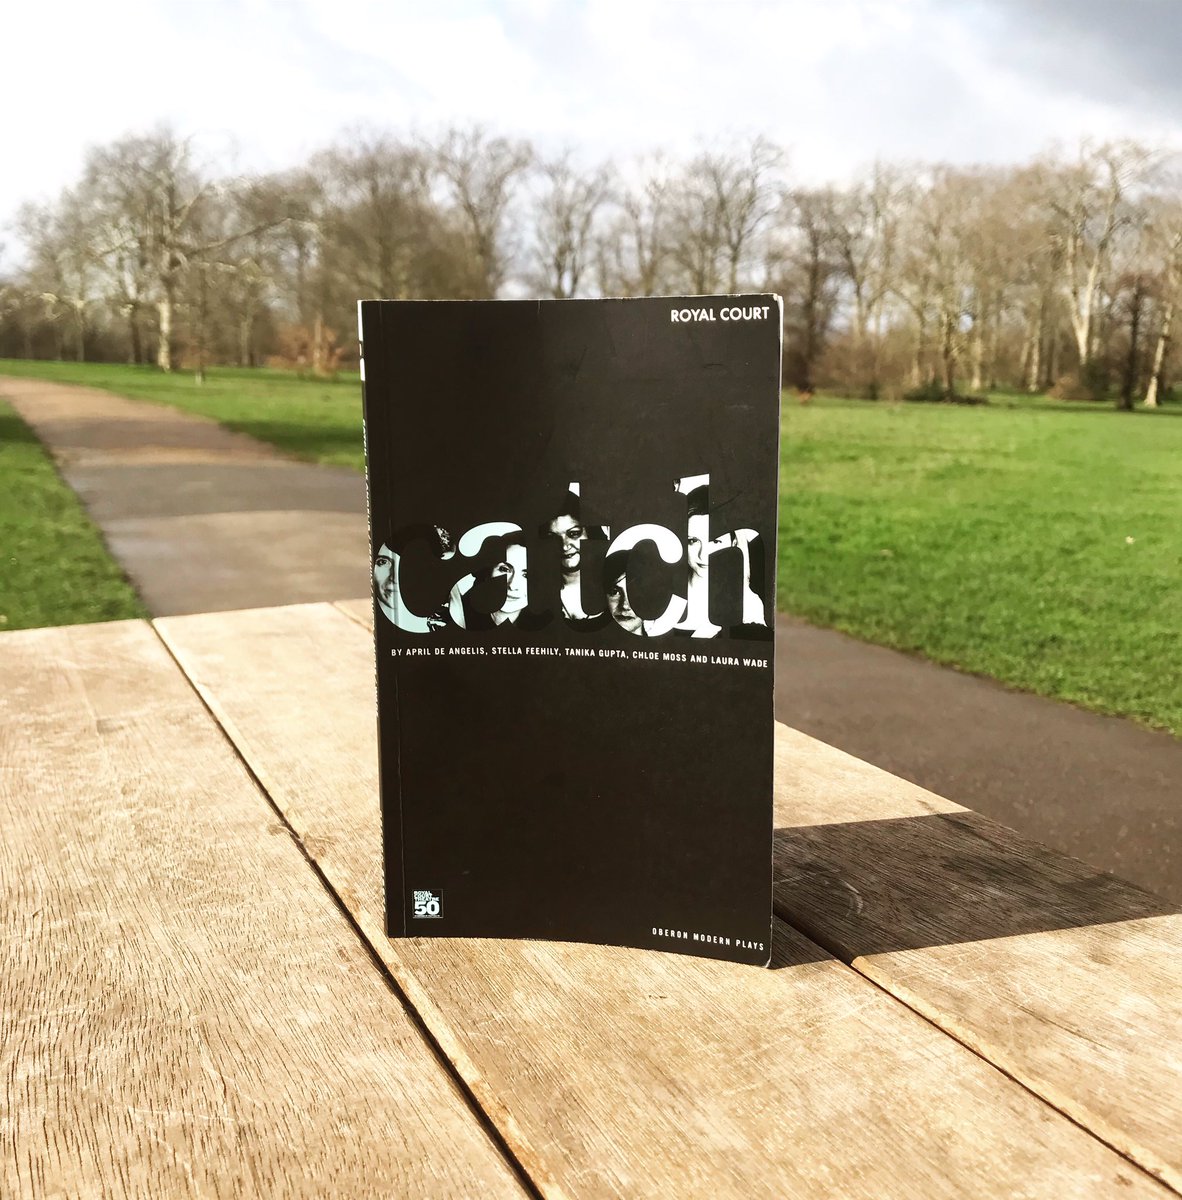 Play No 952 - Catch by April de Angelis, Stella Feehily, Tanika Gupta, Chloe Moss, Laura Wade. With ever increasing societal surveillance, this play asks questions about who we want to become and at what cost? #AprilDeAngelis #StellaFeehily #TanikaGupta #ChloeMoss #LauraWade